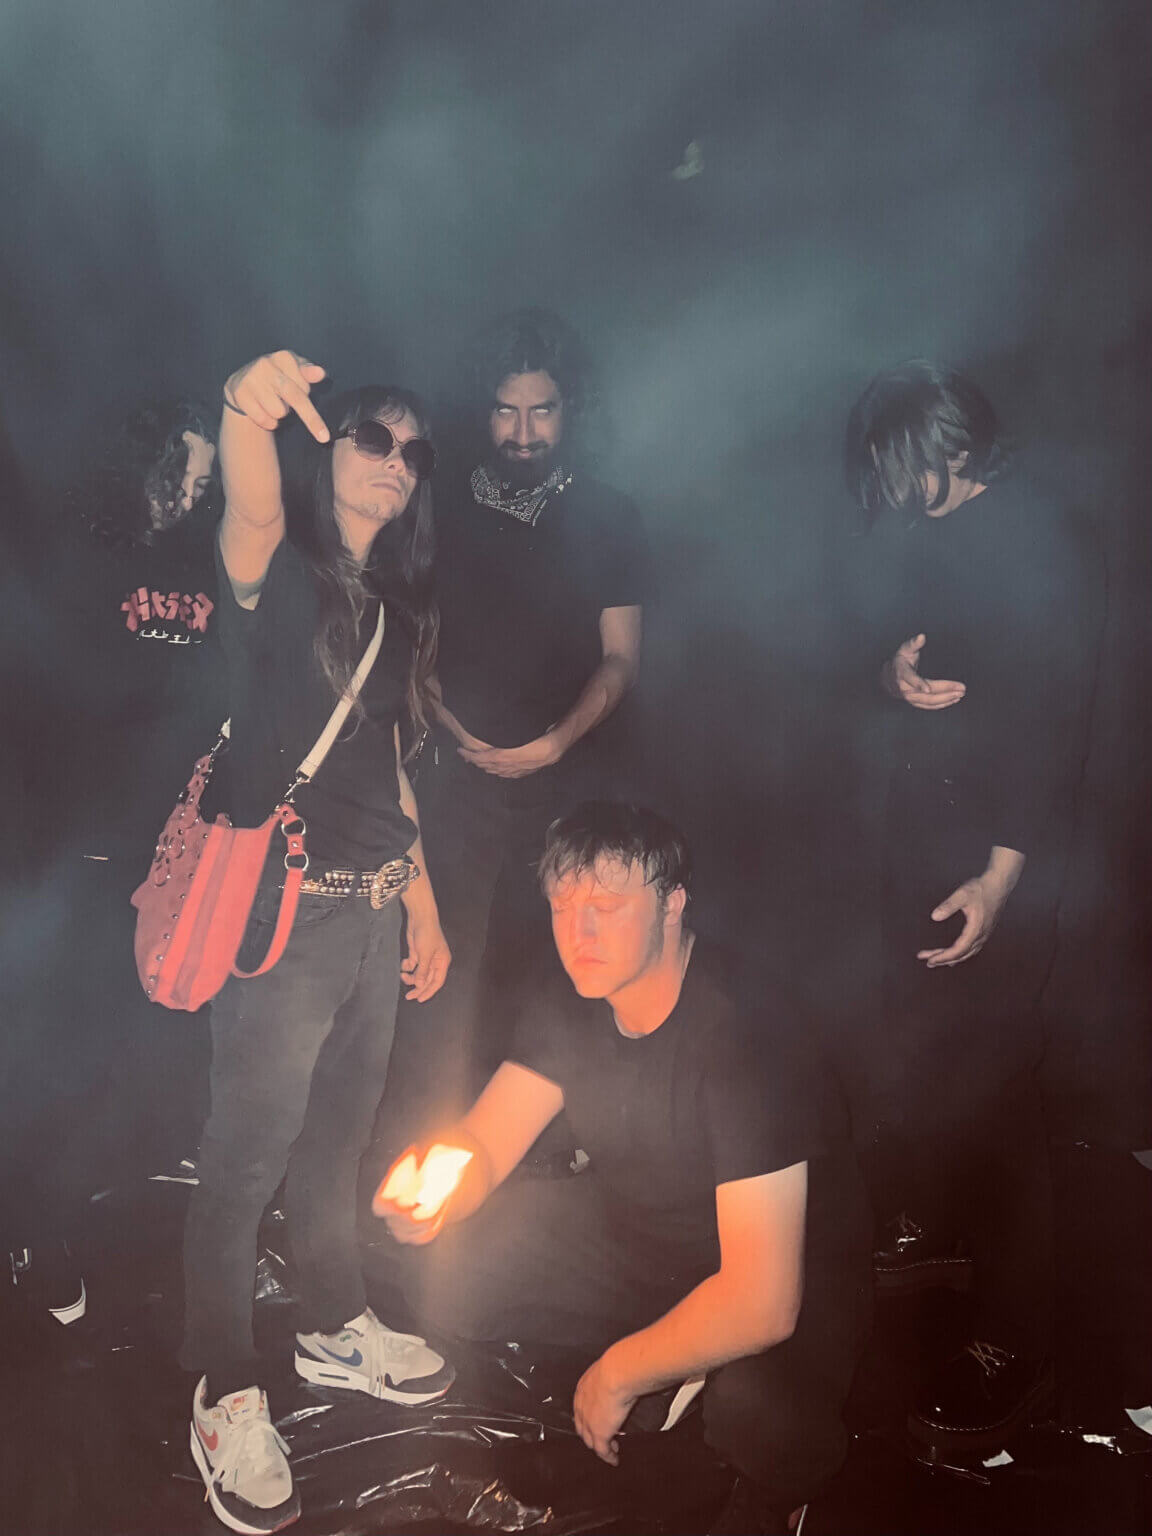 Beach Bums Drop Video for "Overcast"